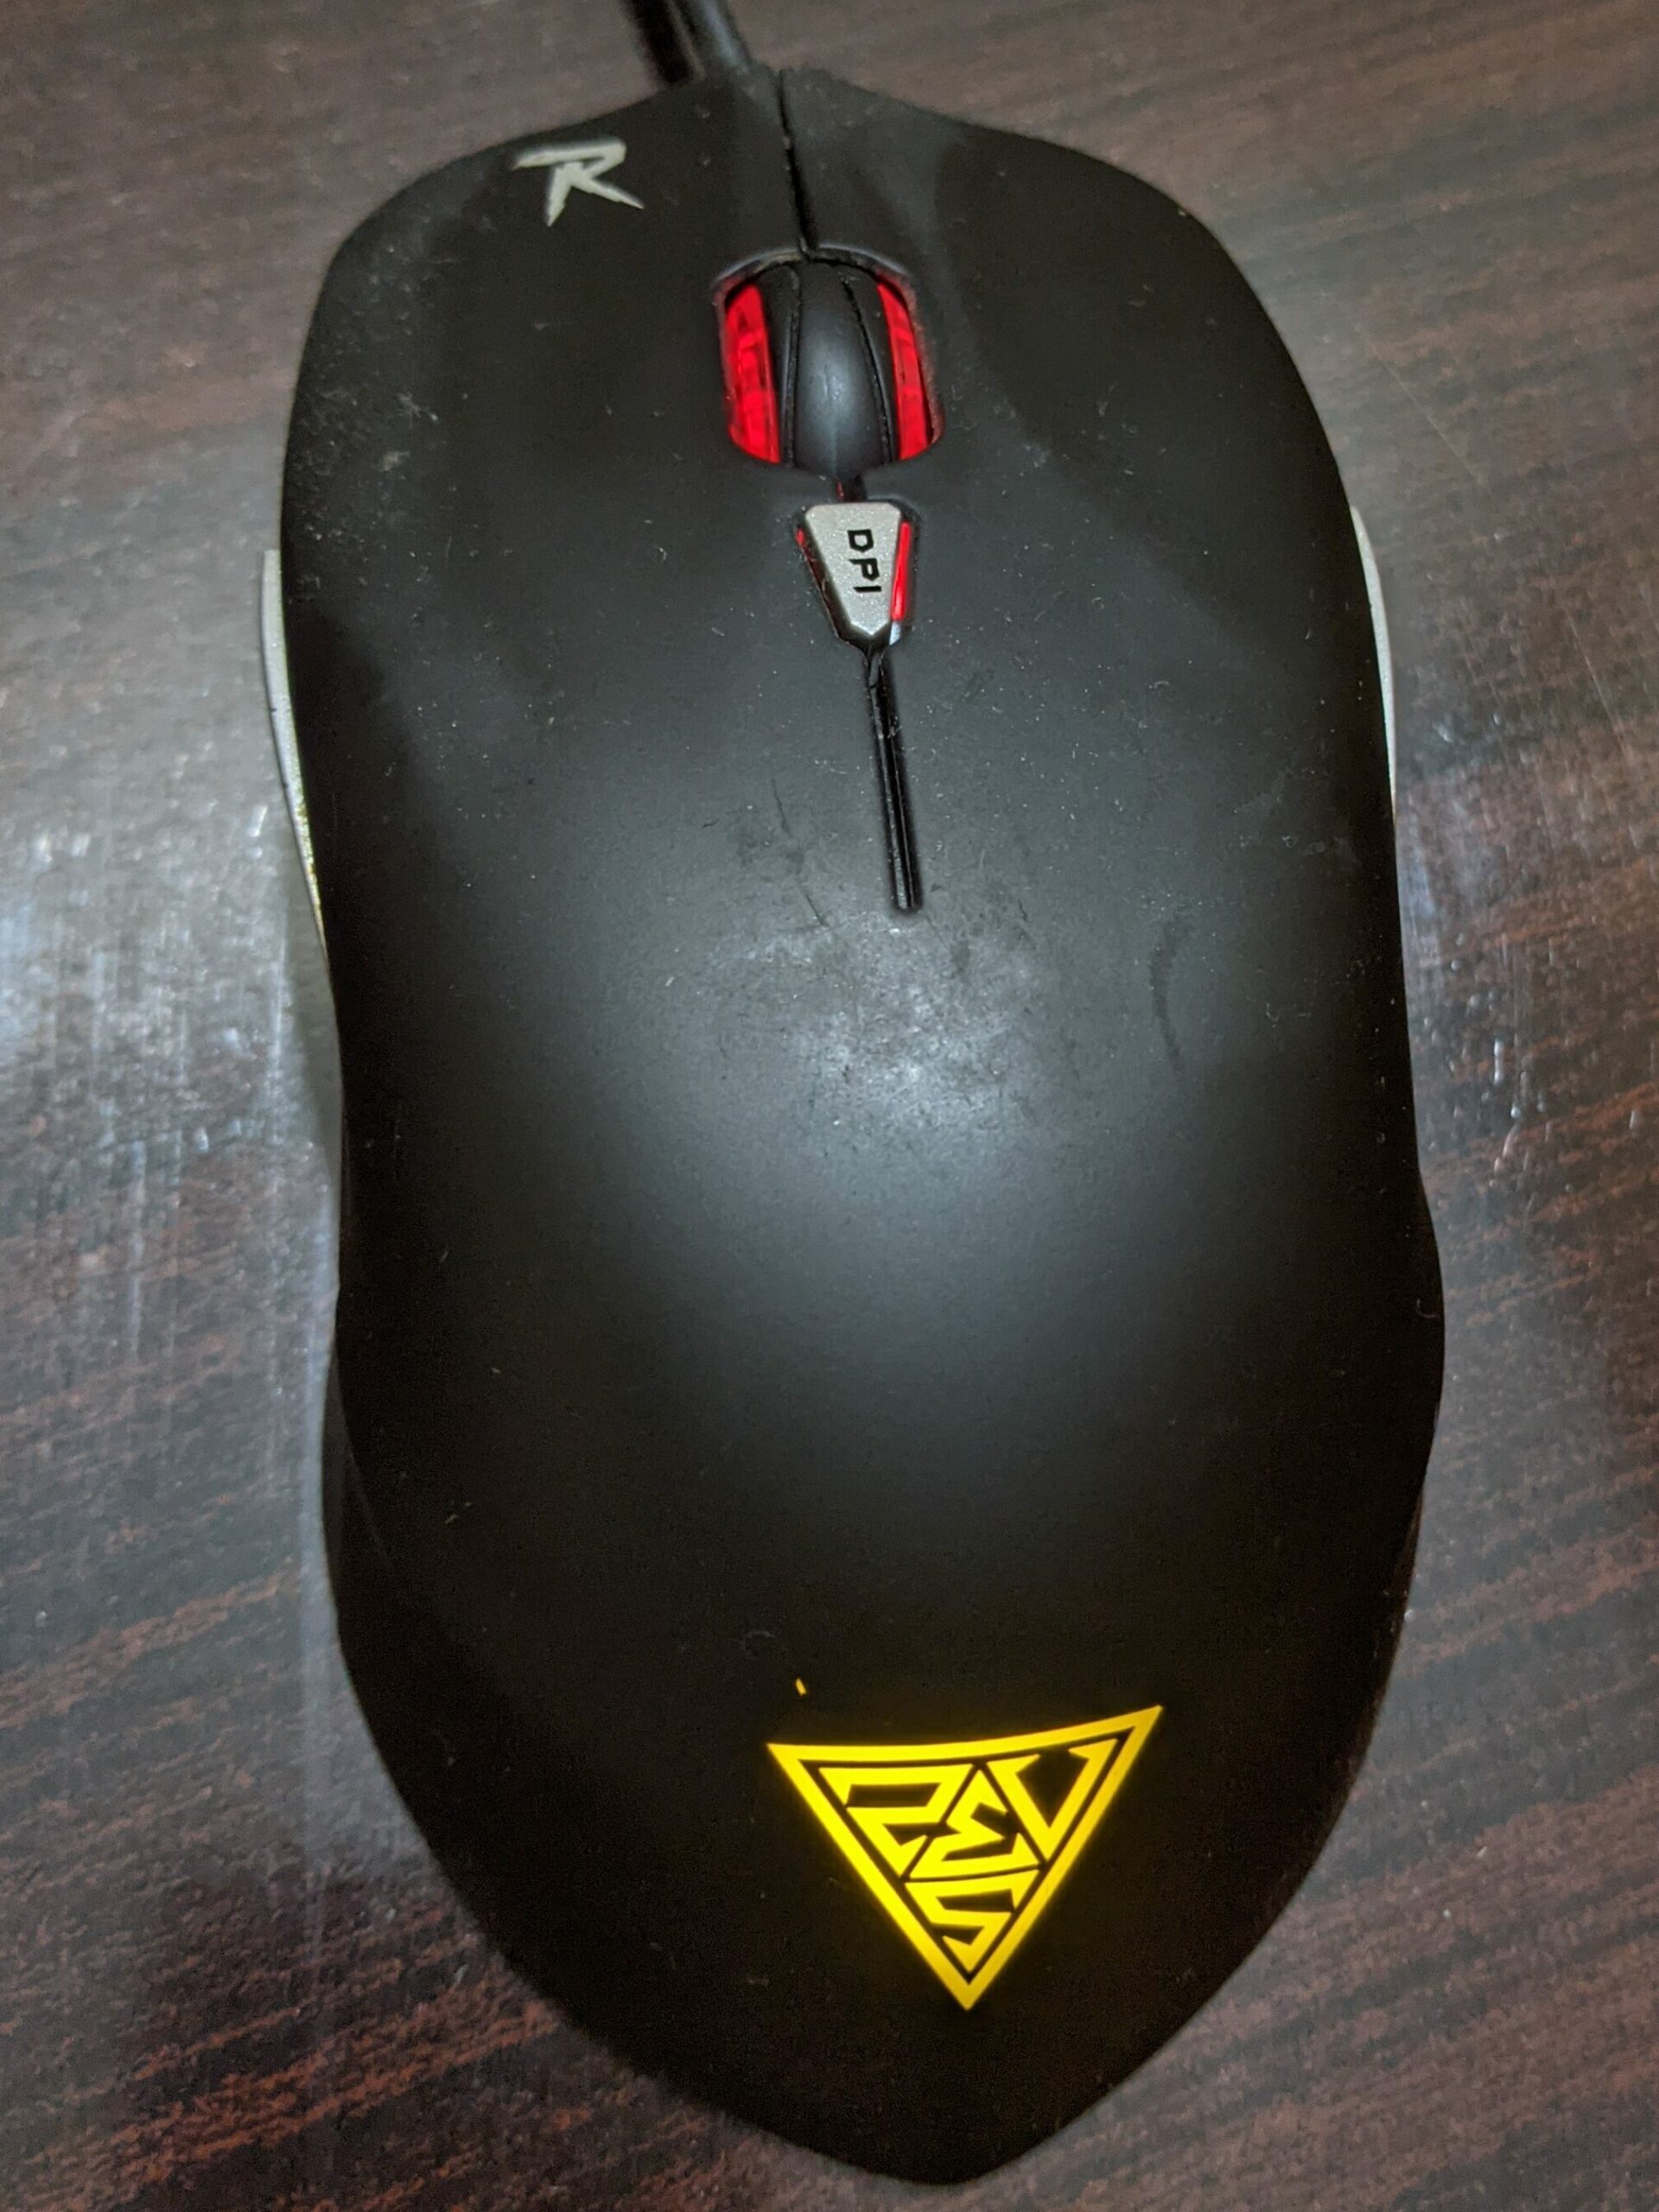 Gamdias Ourea E1 with multiple colors and yellow logo on the back. It has a rubberized material.